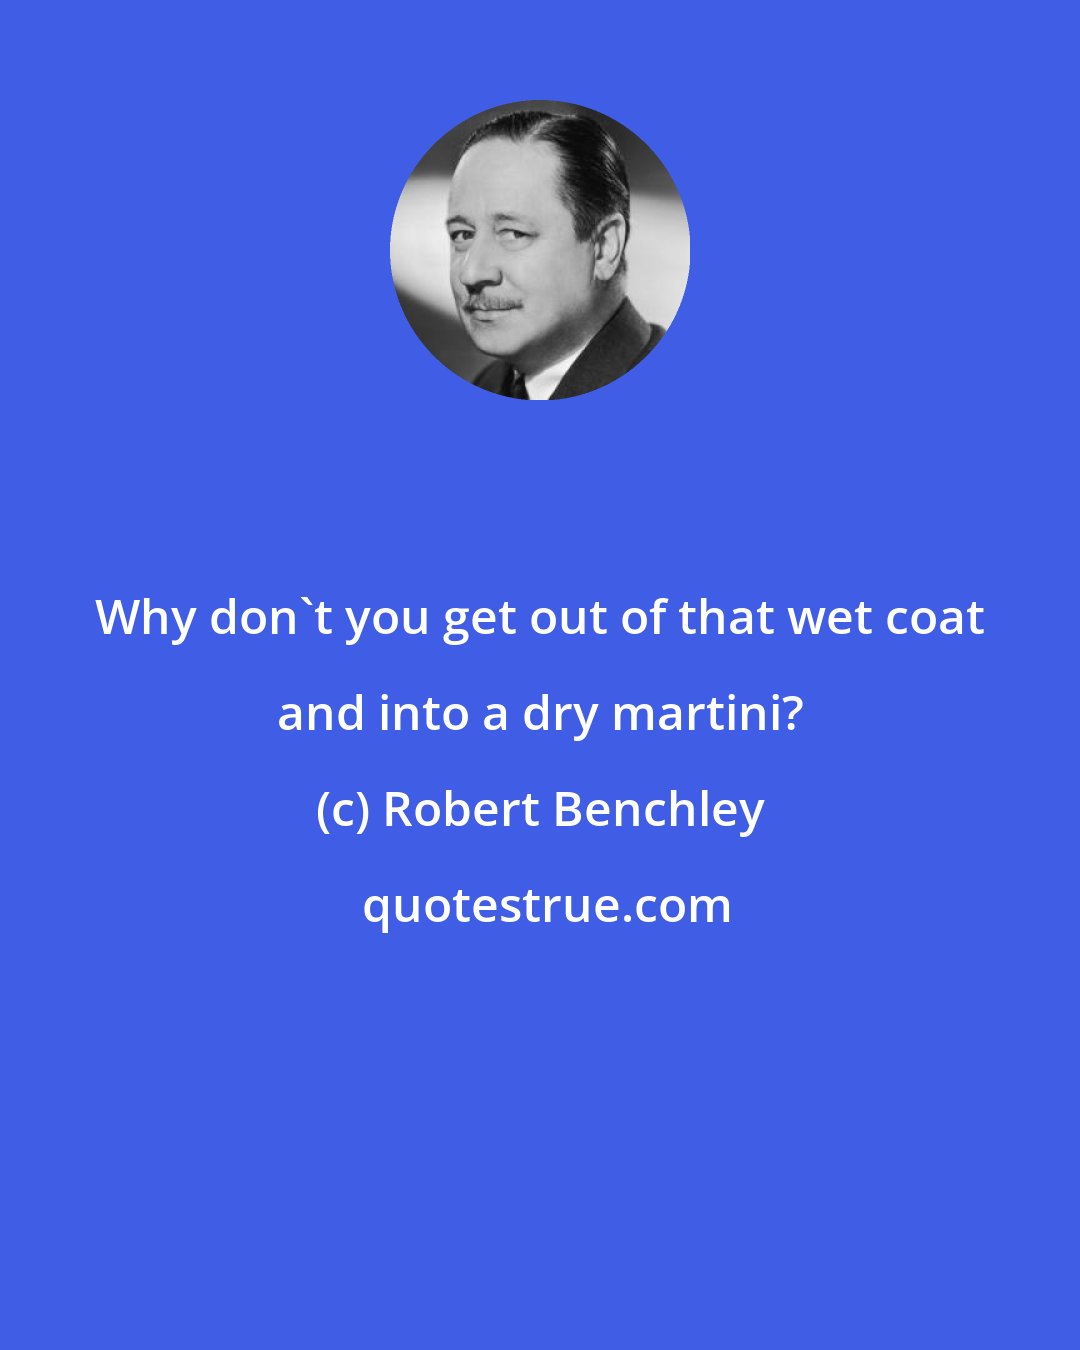 Robert Benchley: Why don't you get out of that wet coat and into a dry martini?